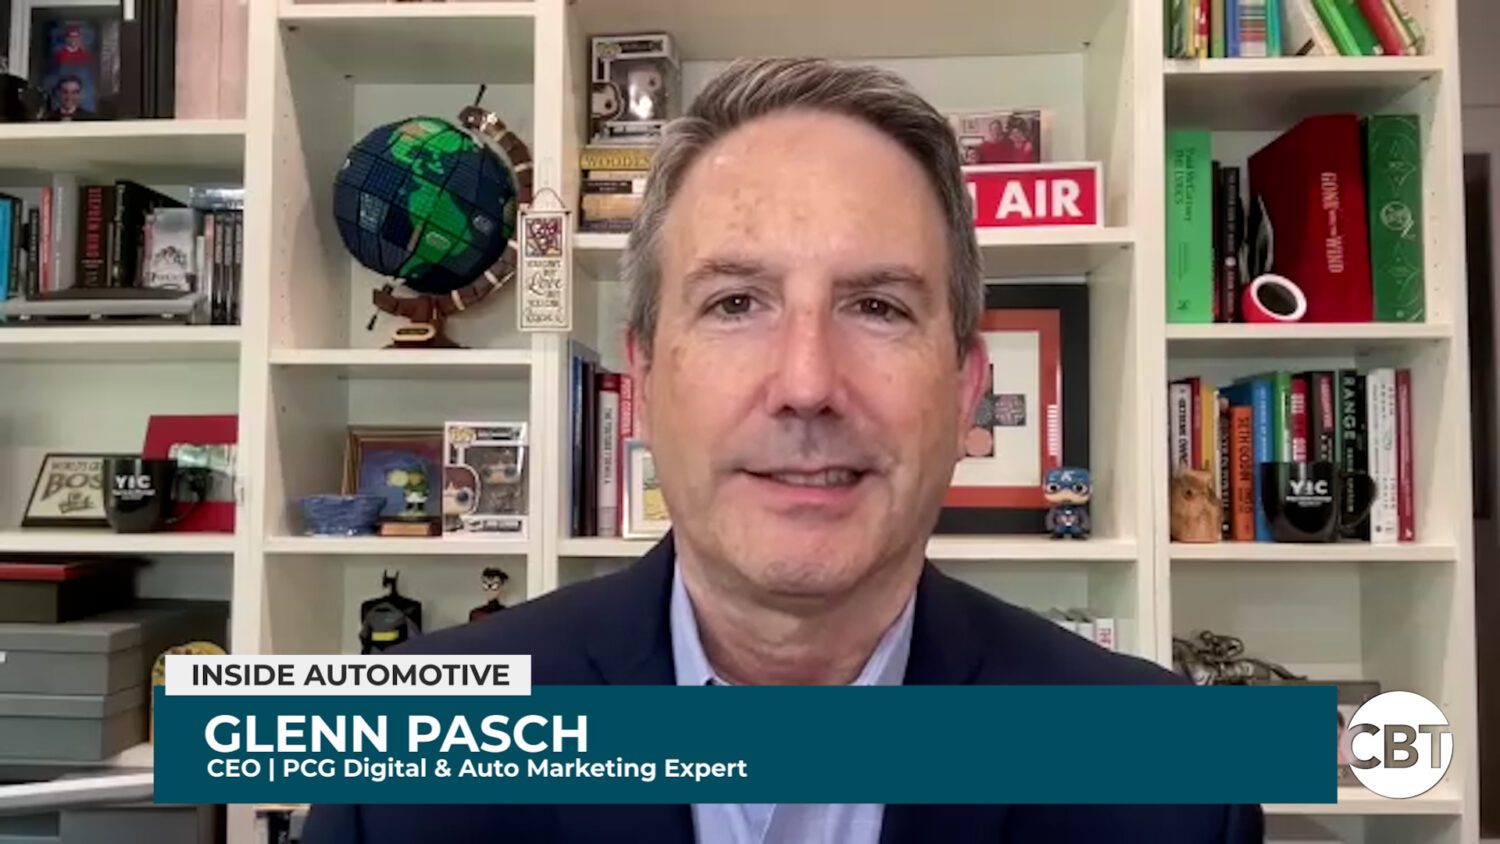 Glenn Pasch joins Inside Automotive to discuss new digital marketing and customer data collection tools for dealers.